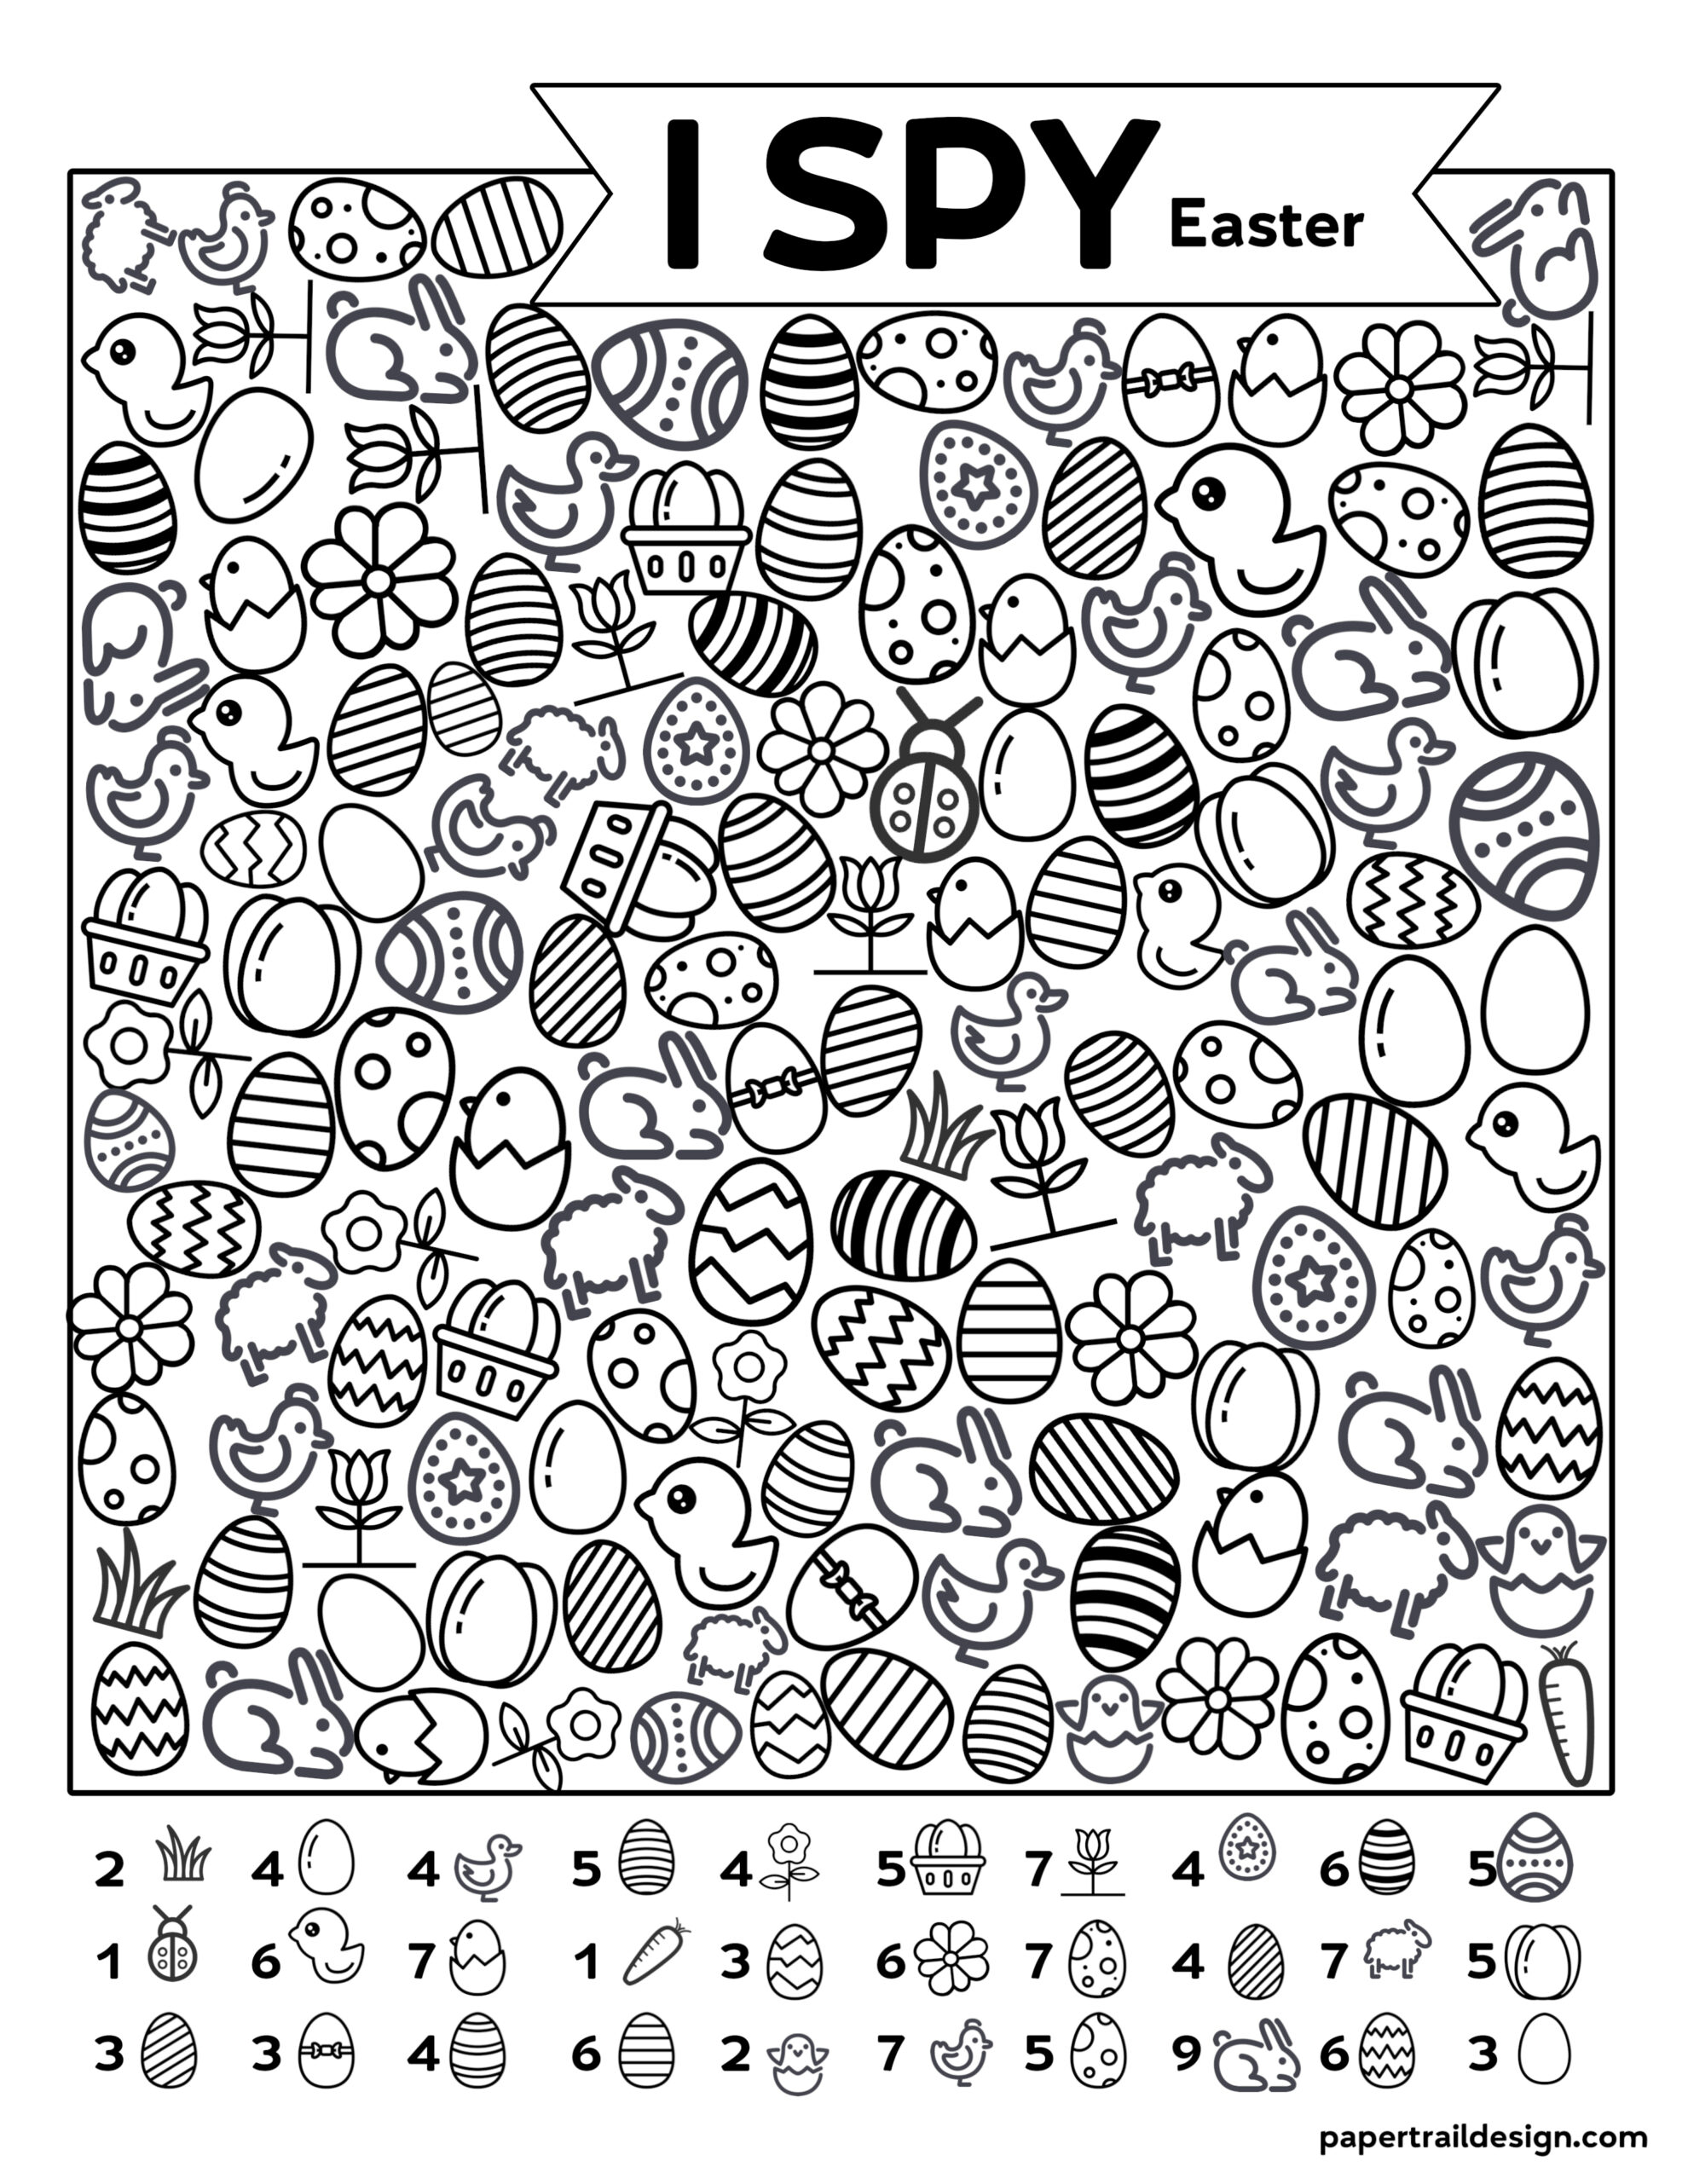 free-printable-i-spy-easter-activity-paper-trail-design